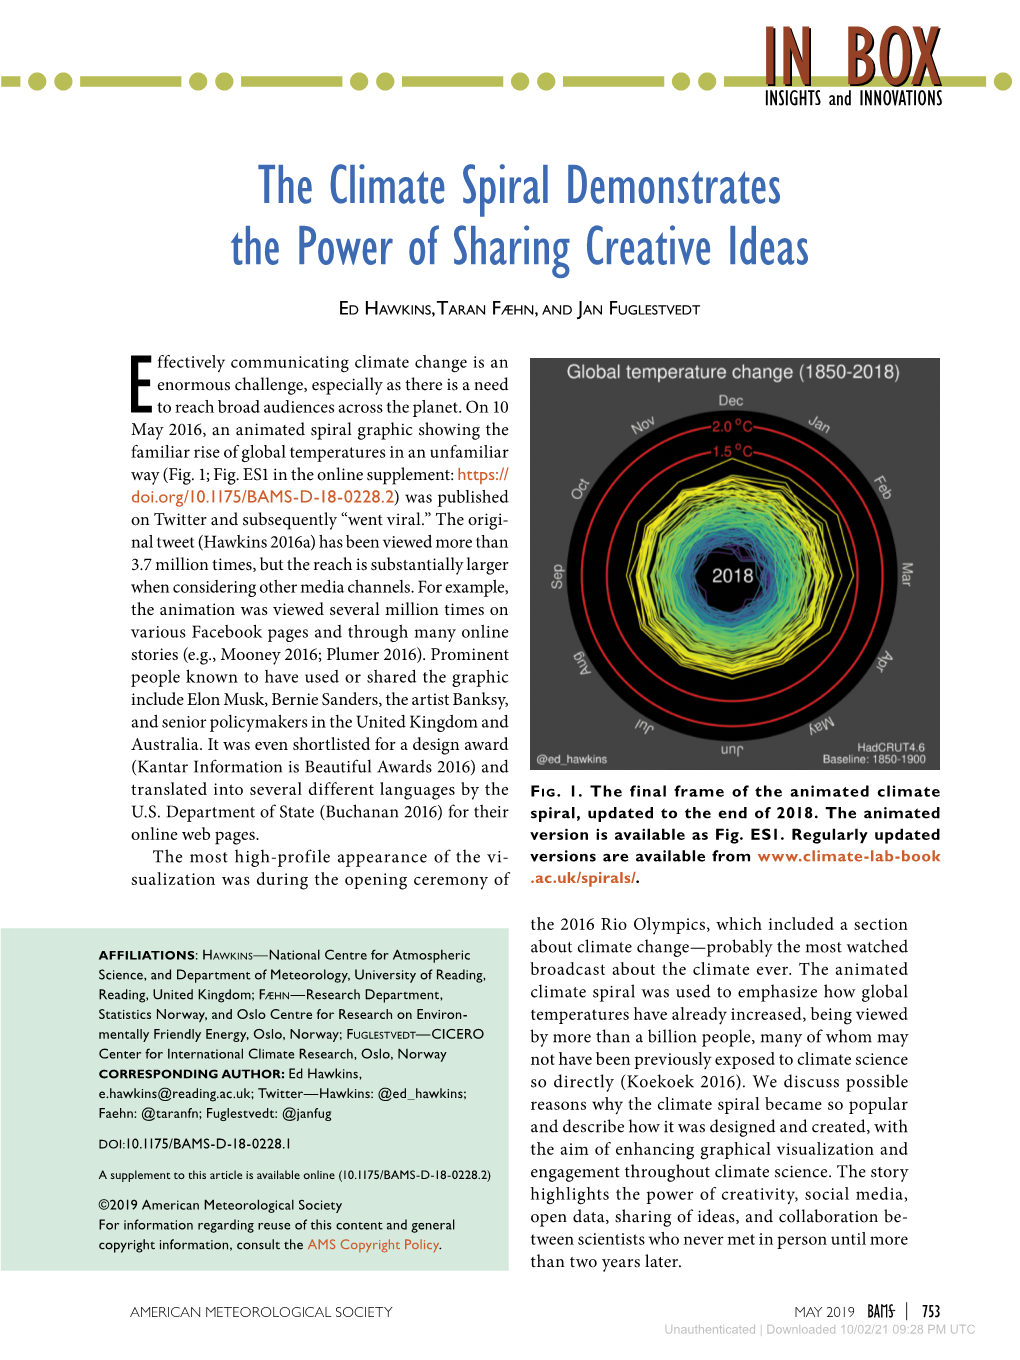 The Climate Spiral Demonstrates the Power of Sharing Creative Ideas